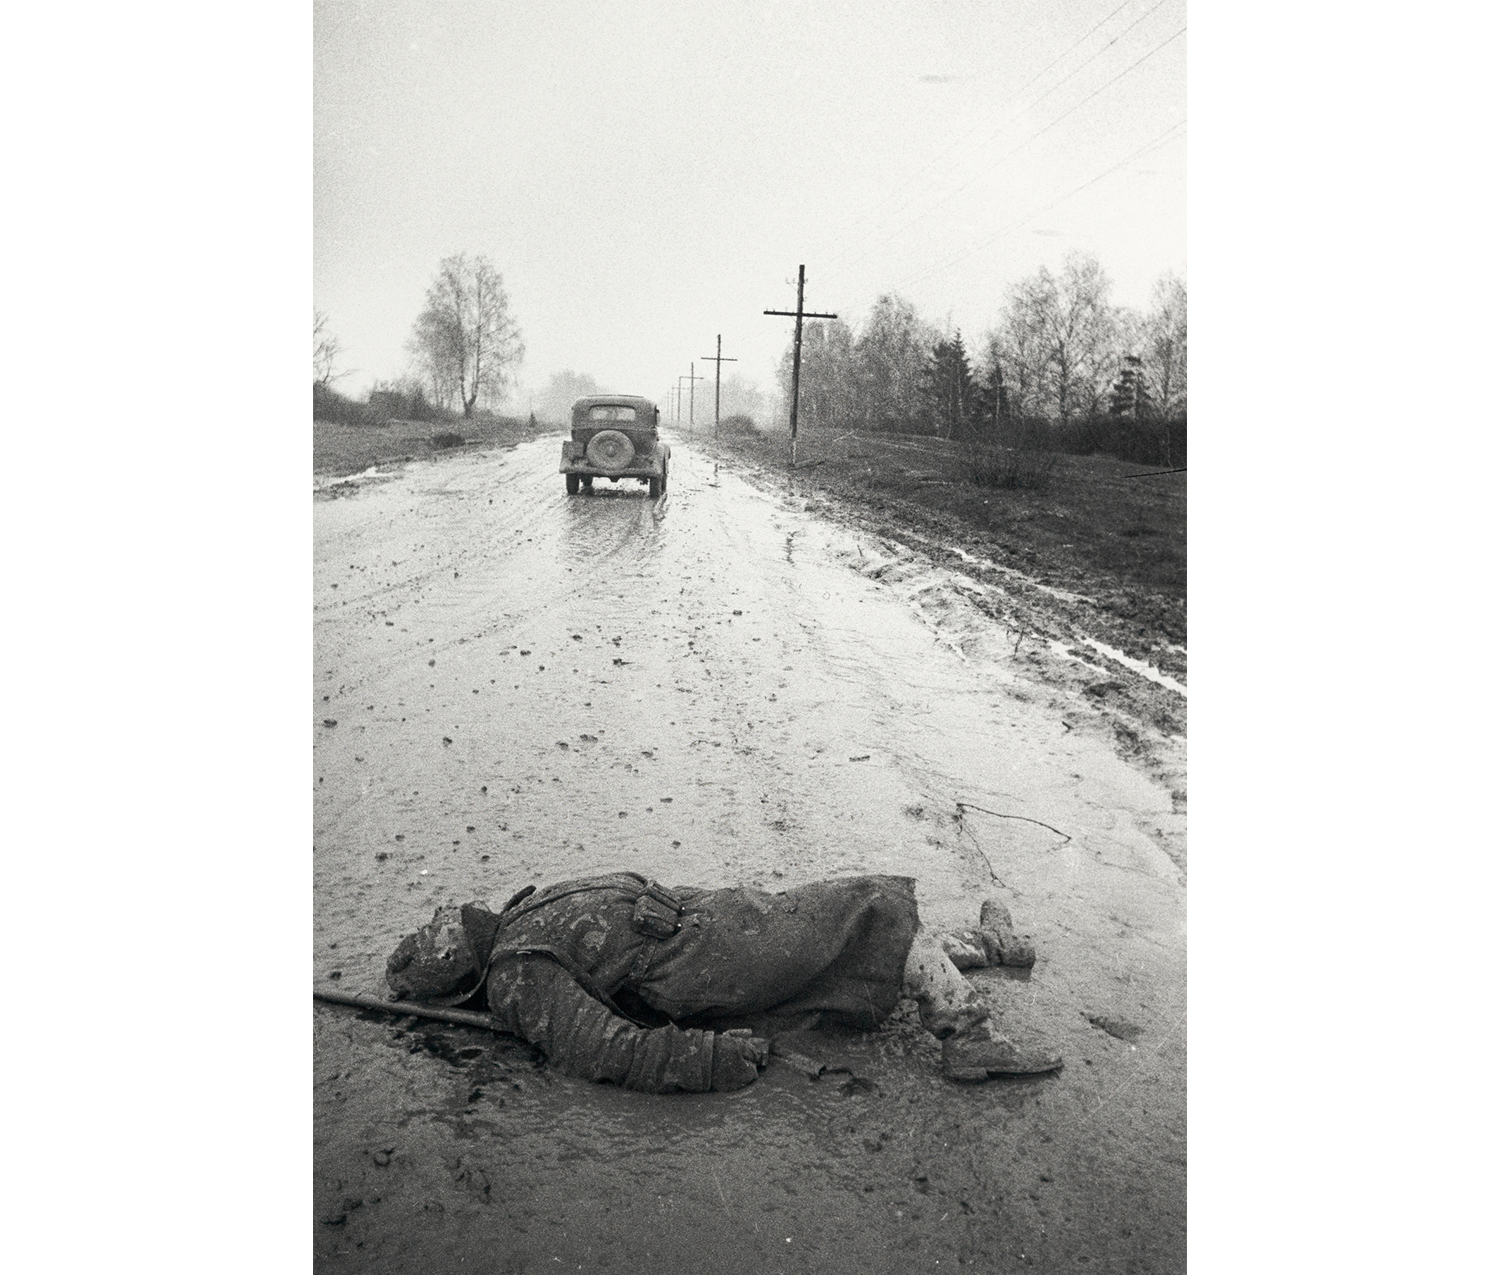 soldier lying on the ground, covered in mud, in the middle of a road with one car driving on it